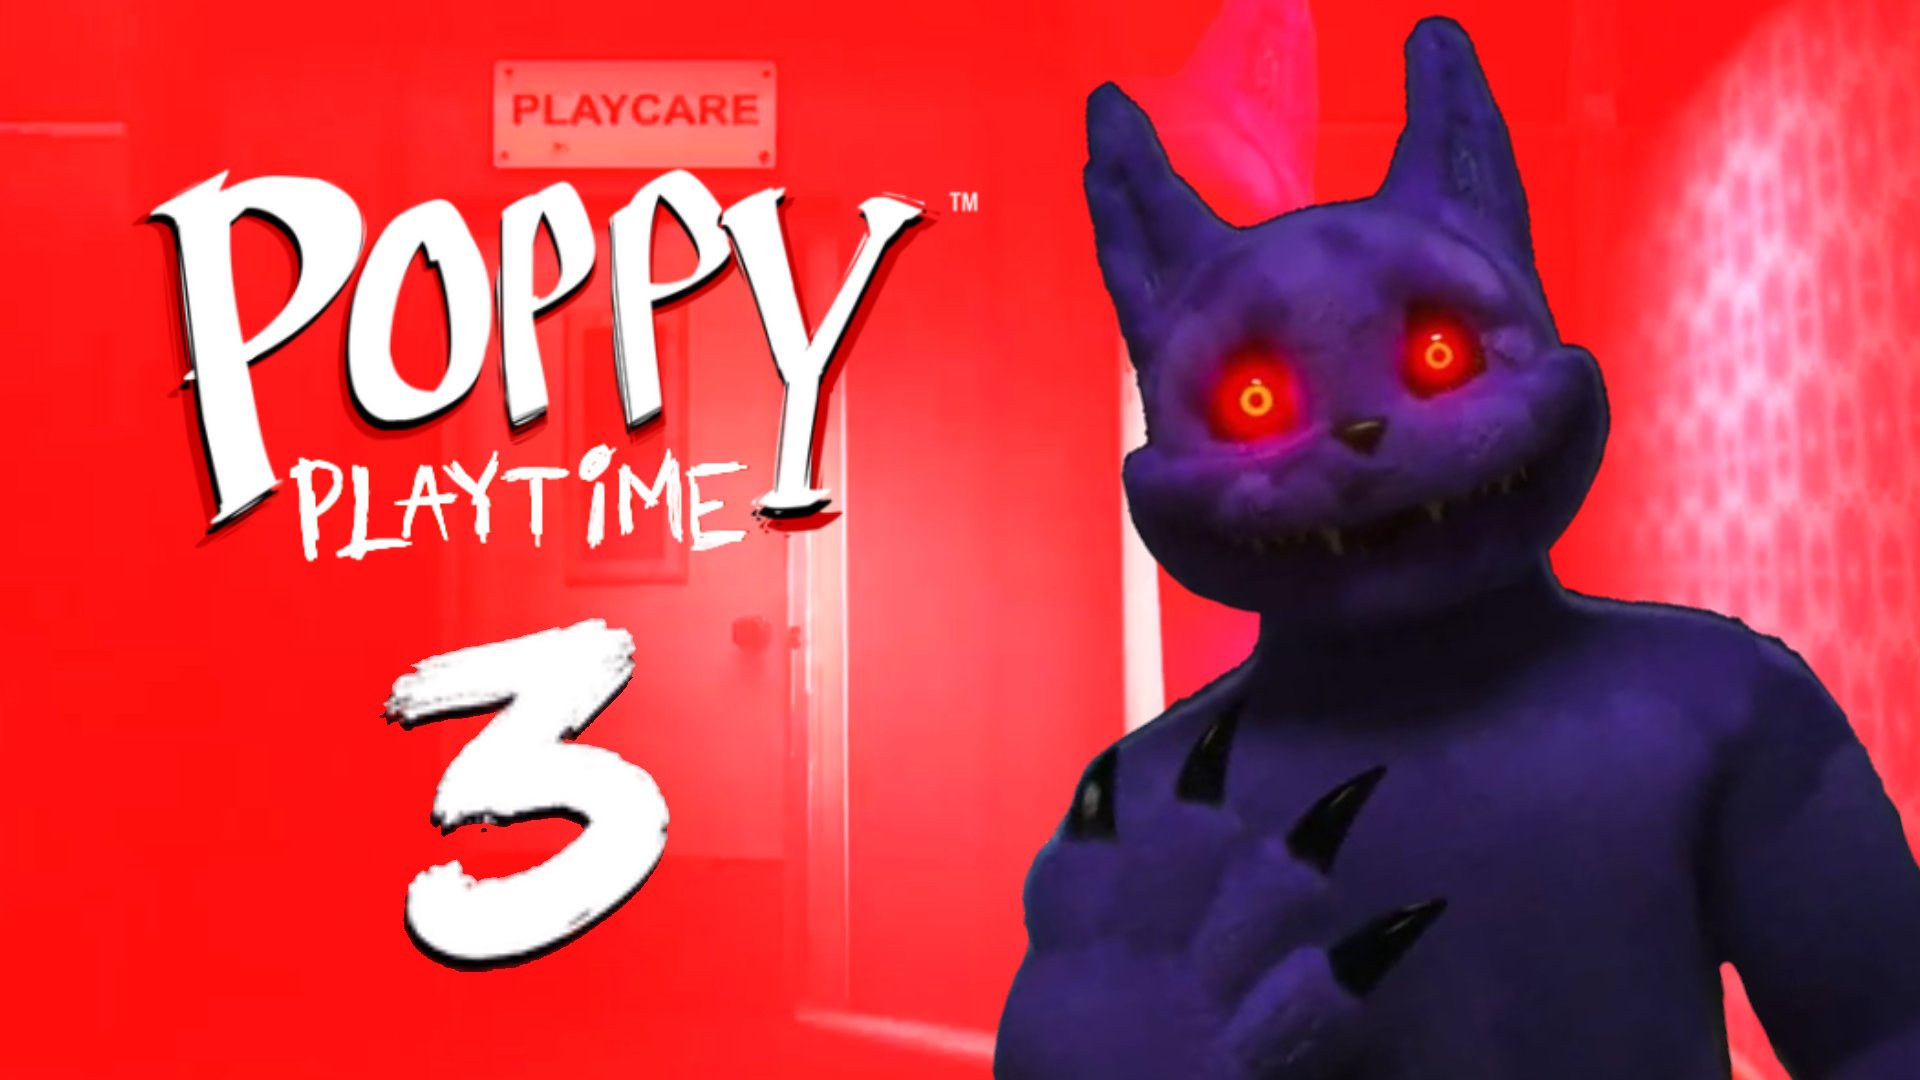 POPPY PLAYTIME CHAPTER 3 is FINALLY on STEAM PRE